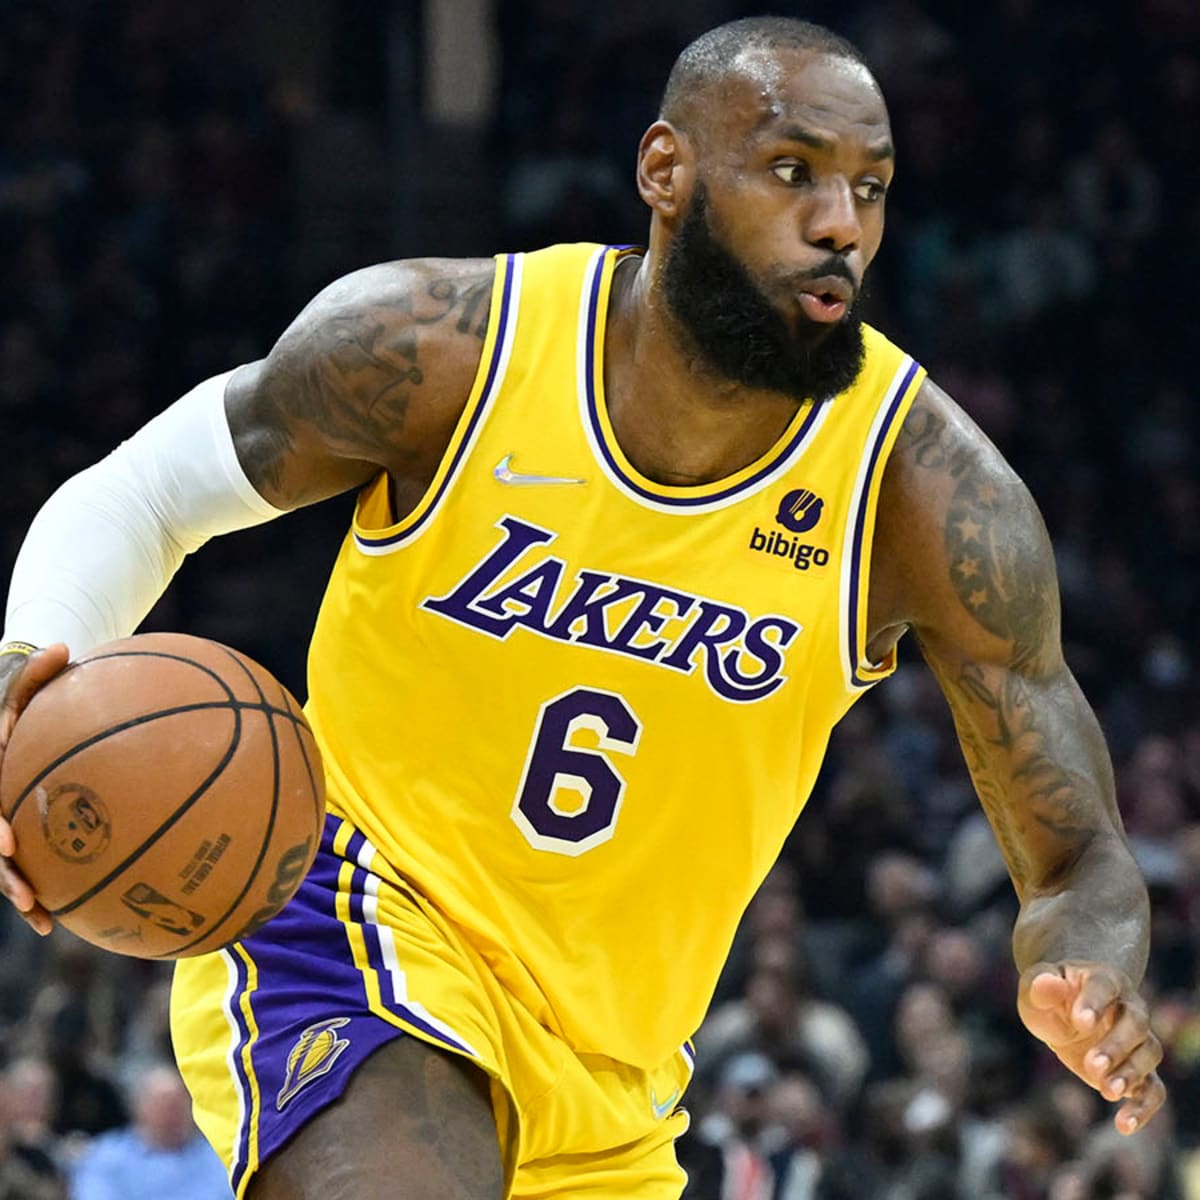 LeBron James hinting at roster changes on the Lakers